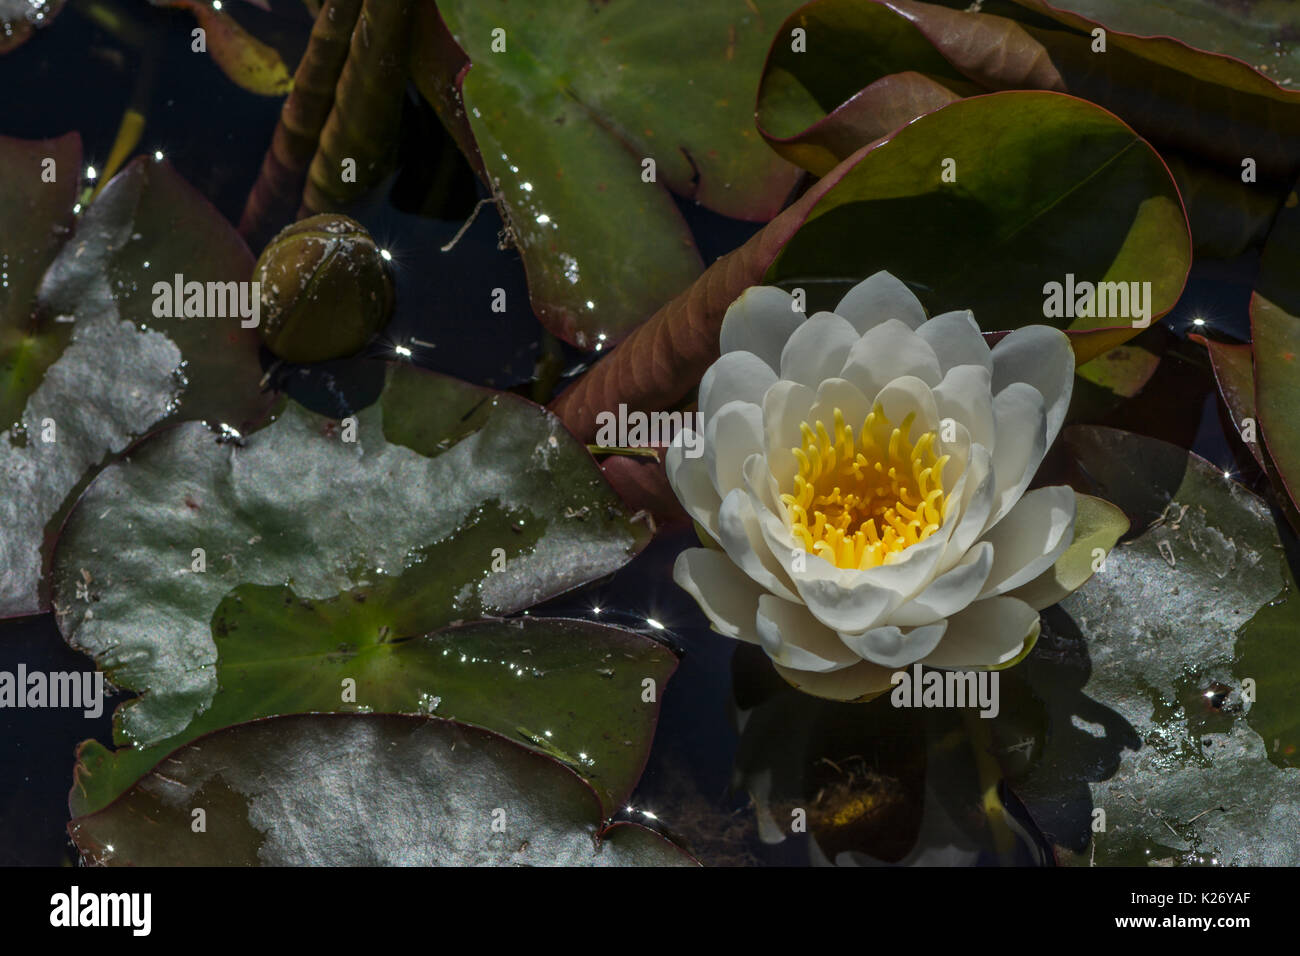 White Nymphaea 'Caroliniana Nivea' Waterlily situated to the right. Stock Photo